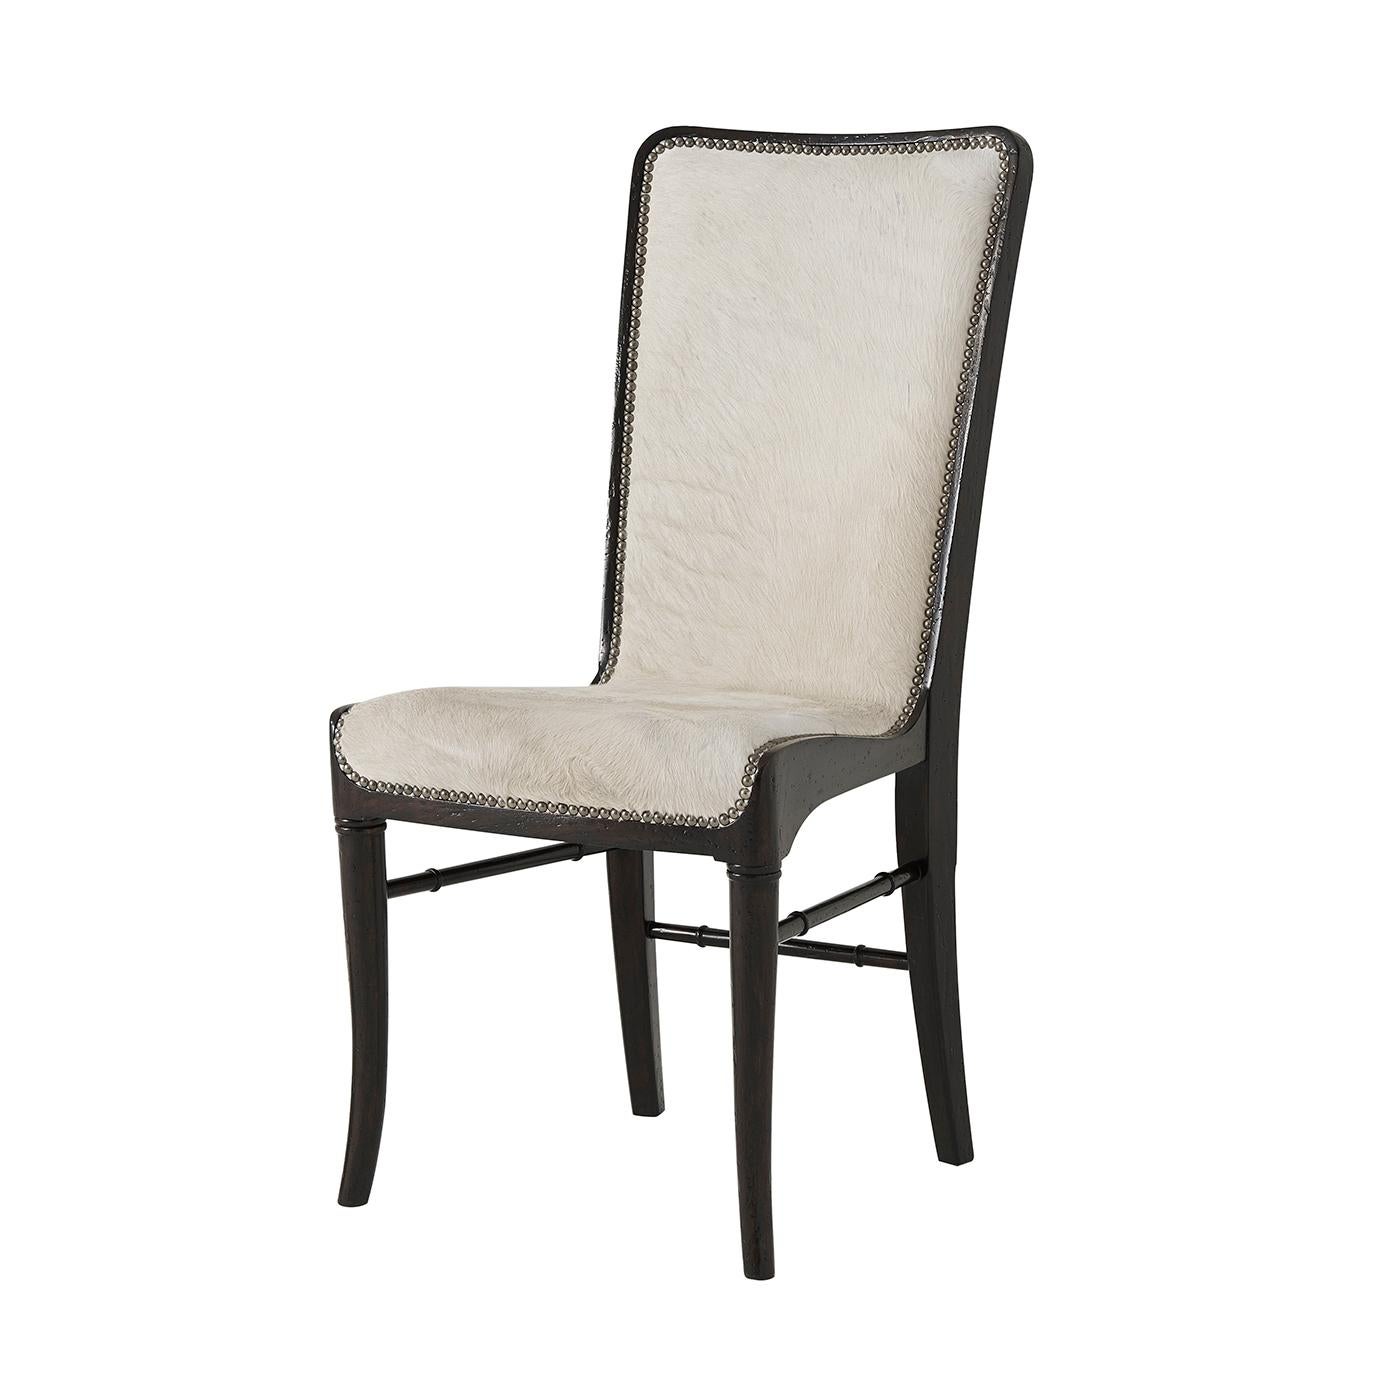 Modern mahogany dining chair with a dark finish, slung upholstered seat and back - upholstered in cream hyde leather - with nailhead trim and turned stretchers.

Dimensions: 19.5